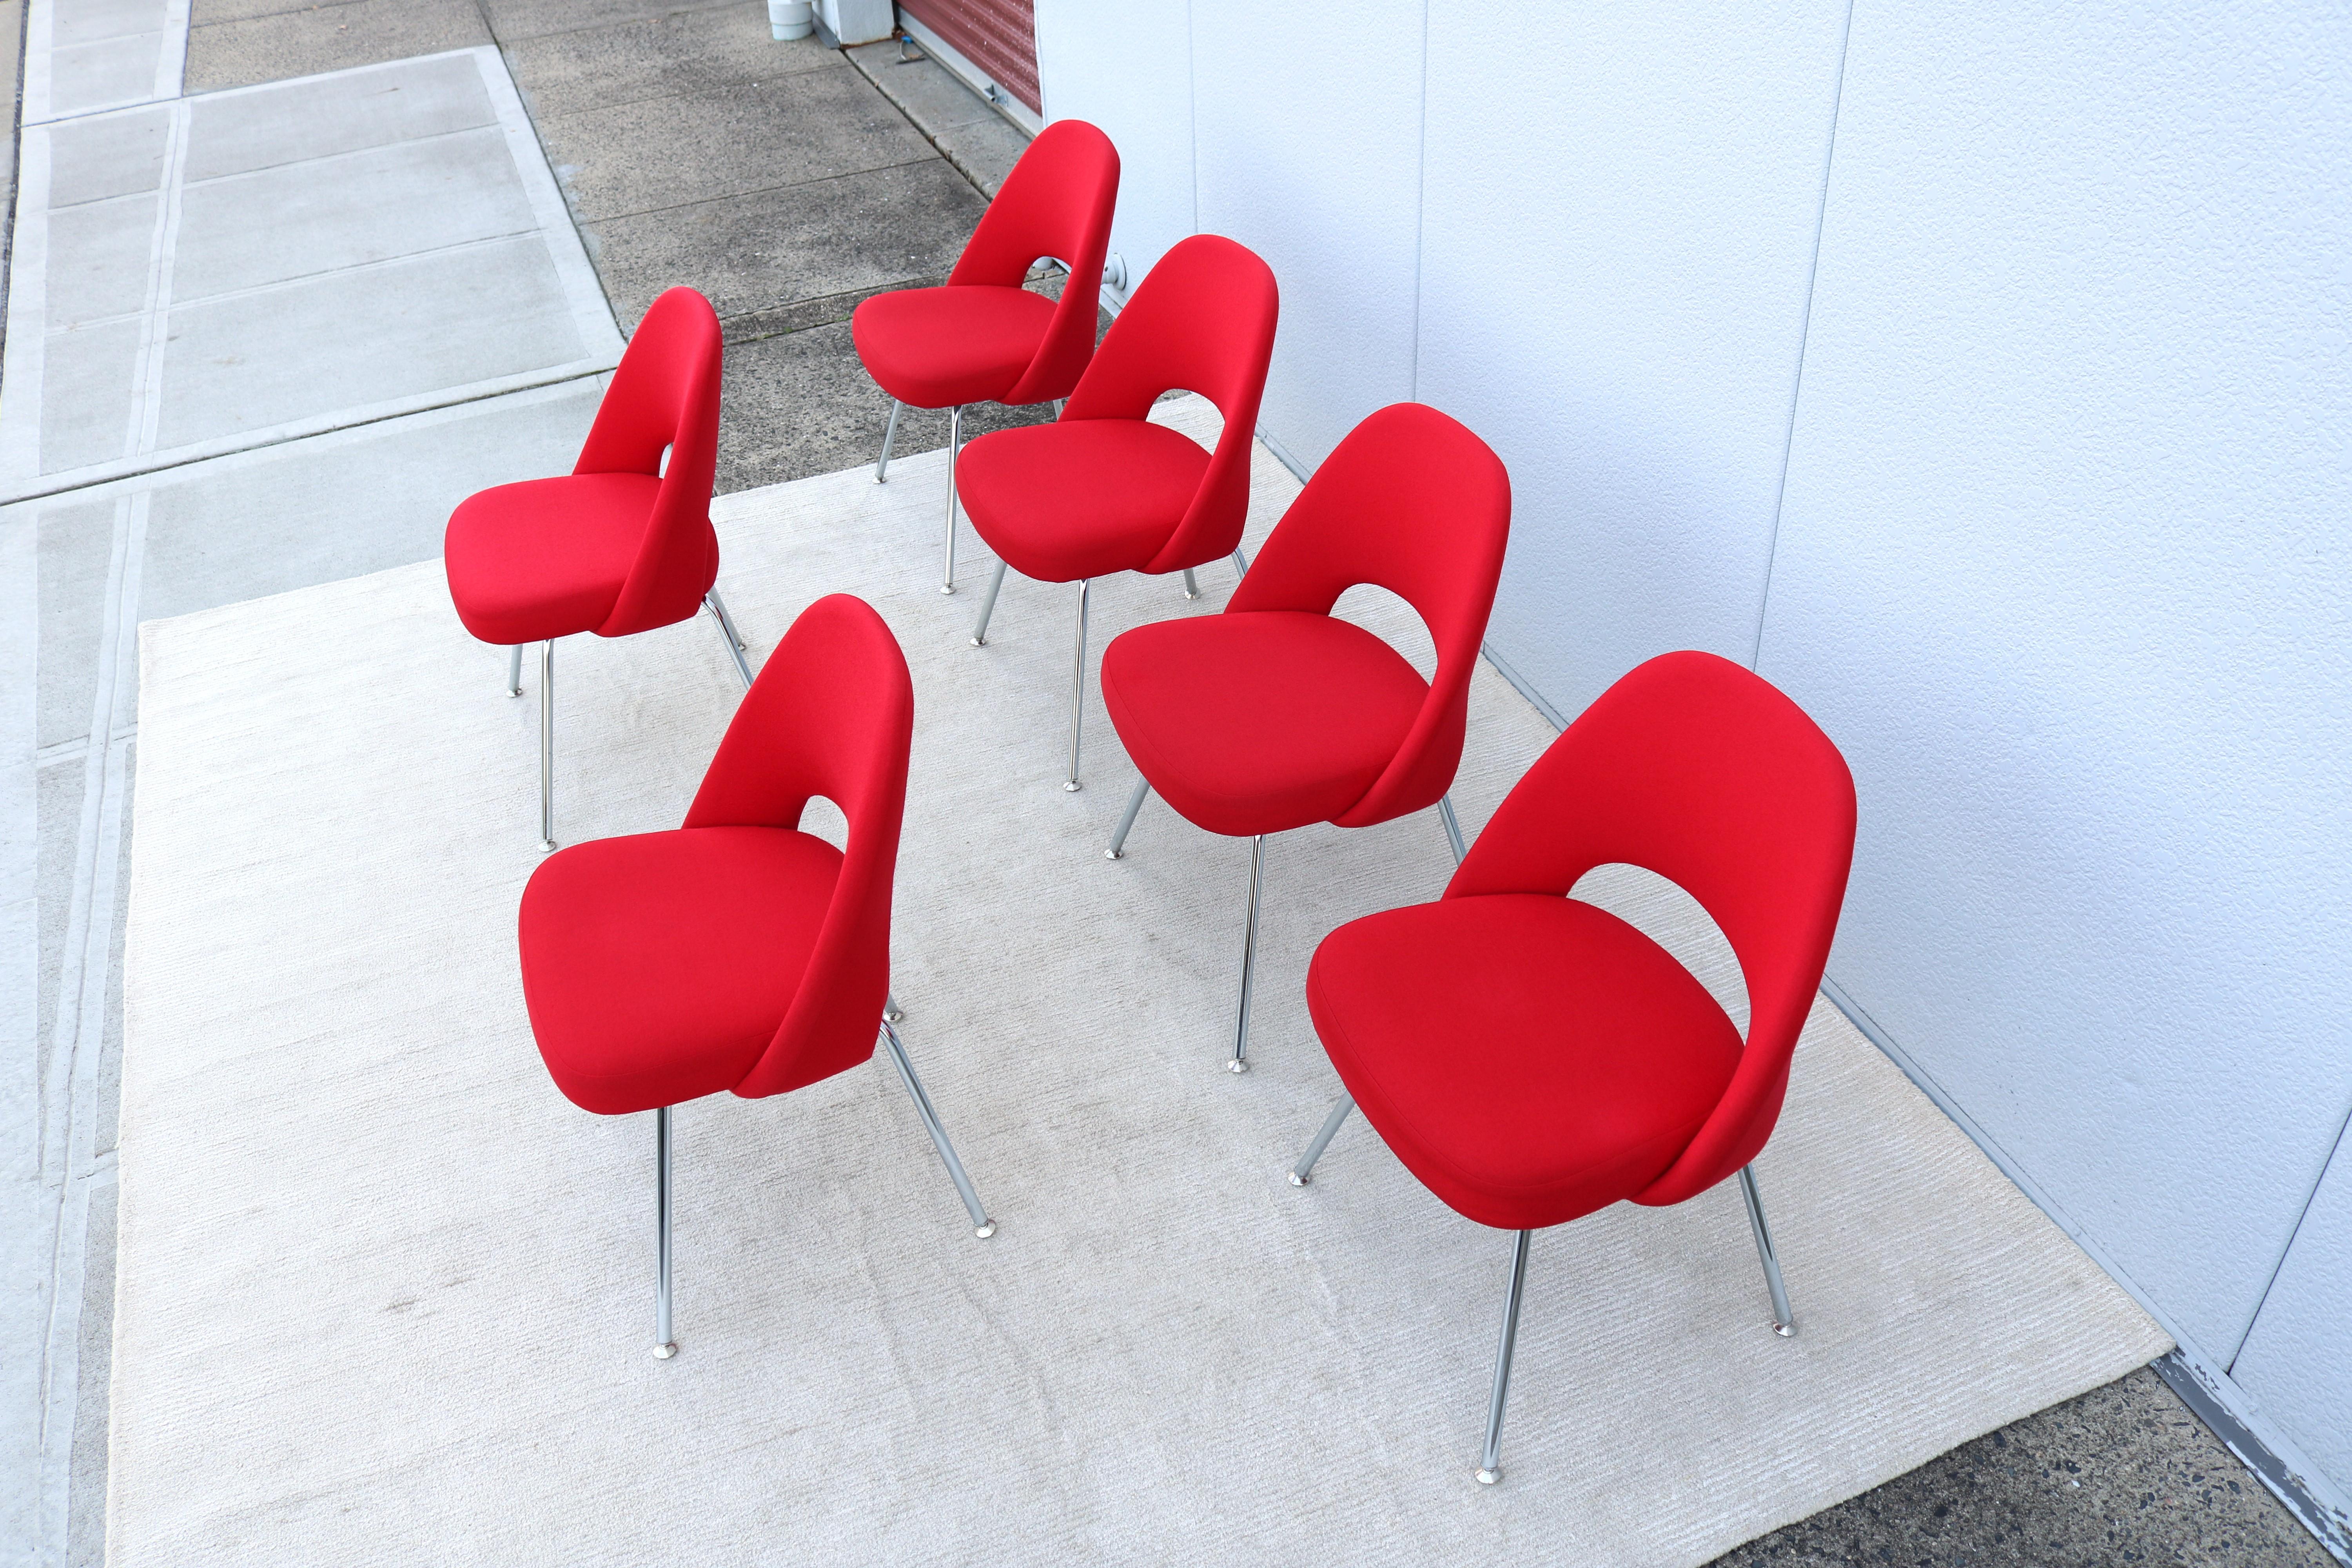 Steel Mid-Century Modern Eero Saarinen for Knoll Red Executive Armless Chairs Set of 6 For Sale